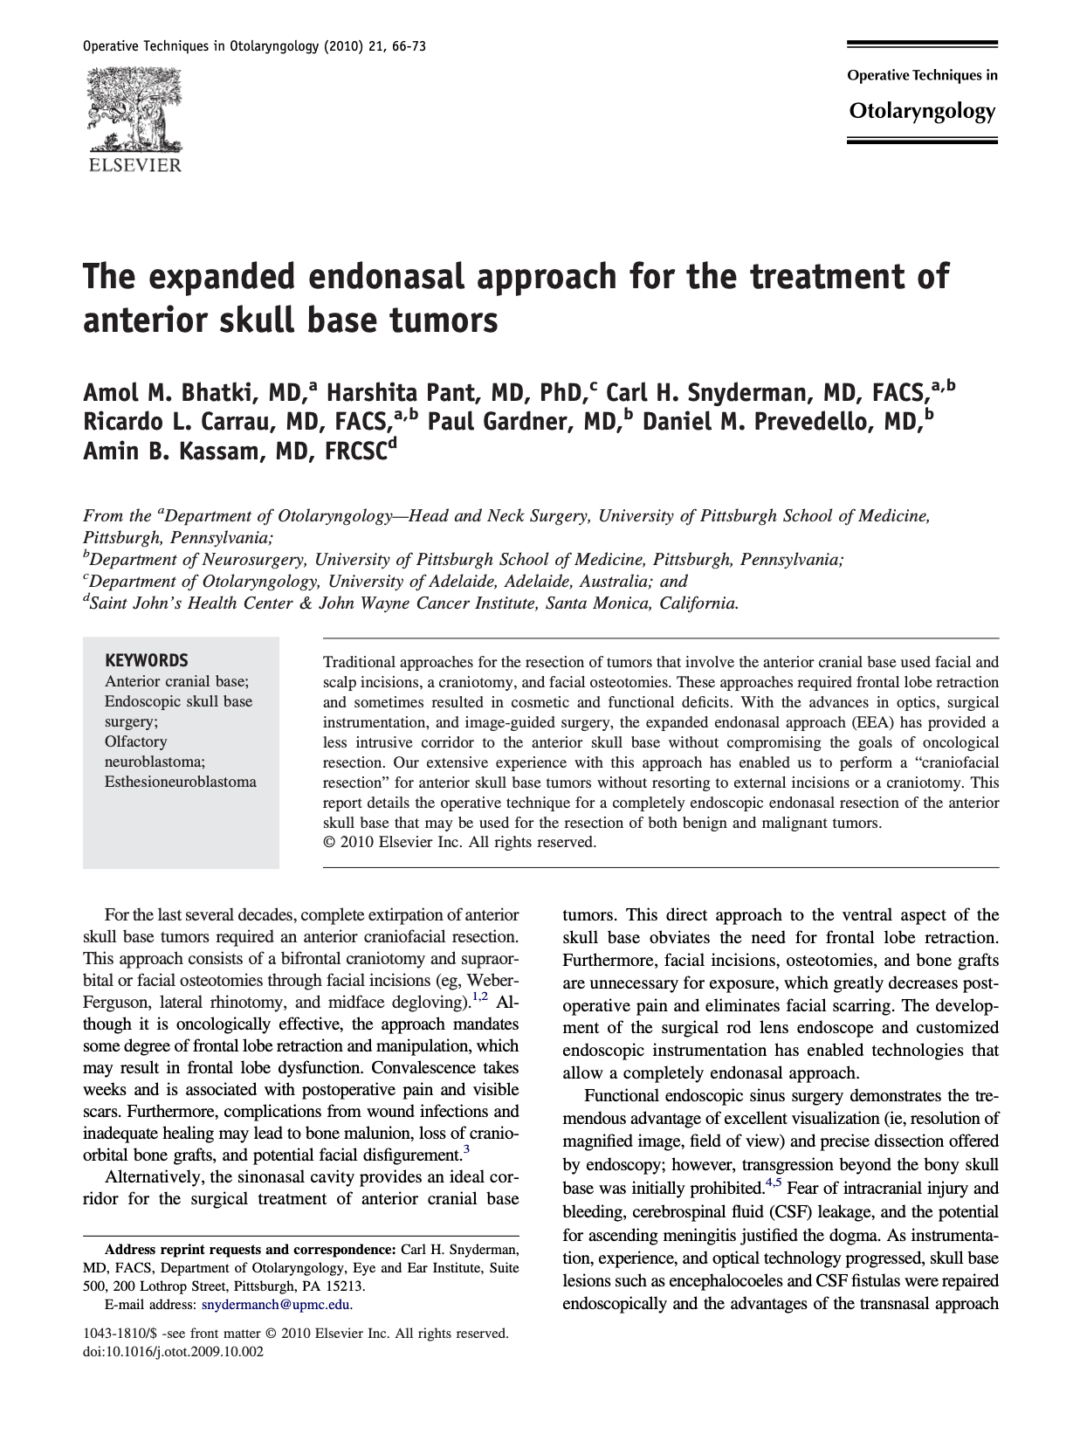 The expanded endonasal approach for the treatment of anterior skull base tumors